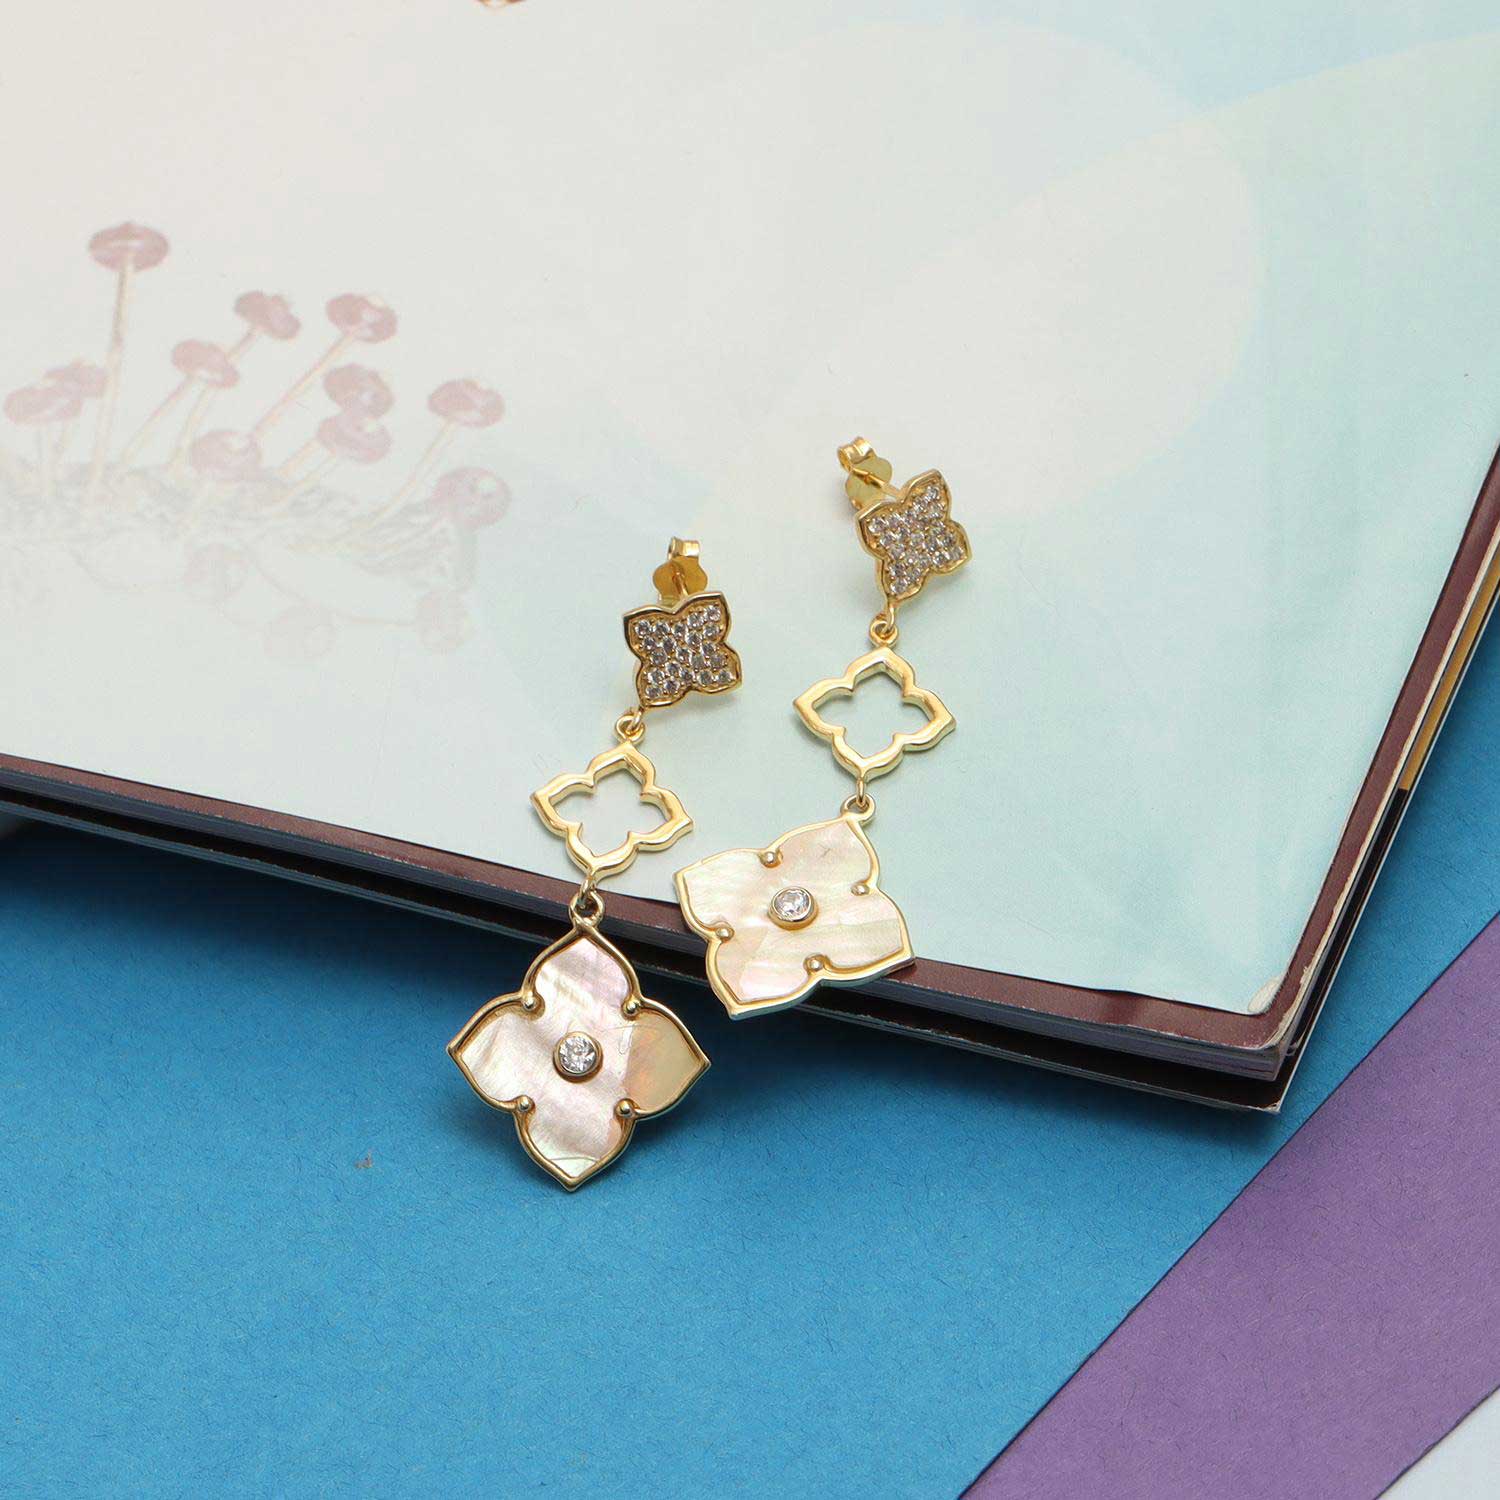 925 Sterling Silver 14K Gold-Plated Mother of Pearl CZ Three Clover Flower Drop Dangle Earrings for Women Teen